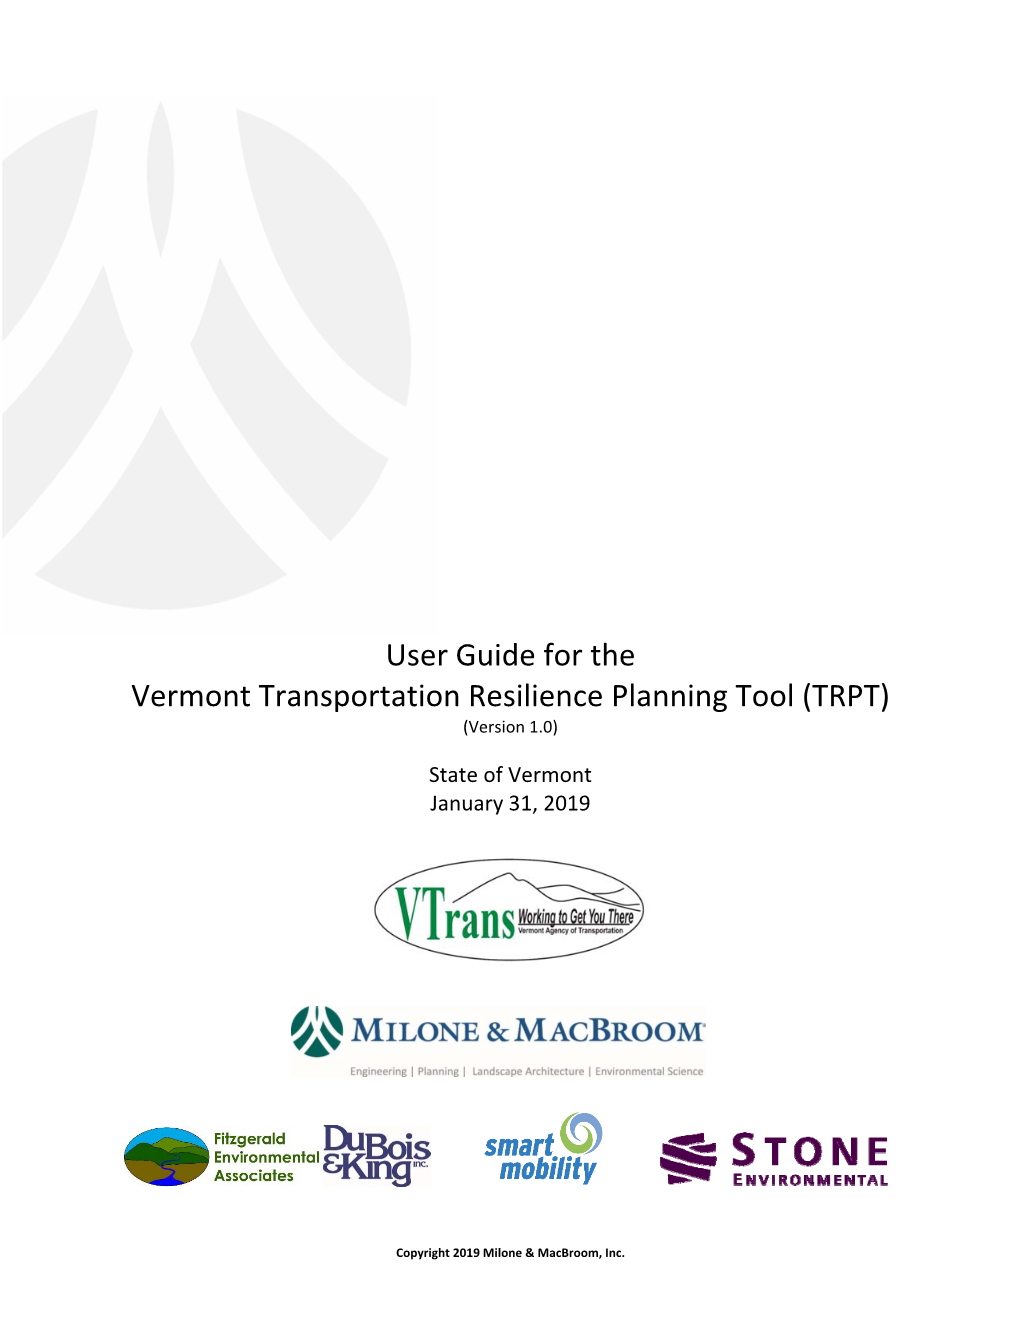 User Guide for the Vermont Transportation Resilience Planning Tool (TRPT) (Version 1.0)